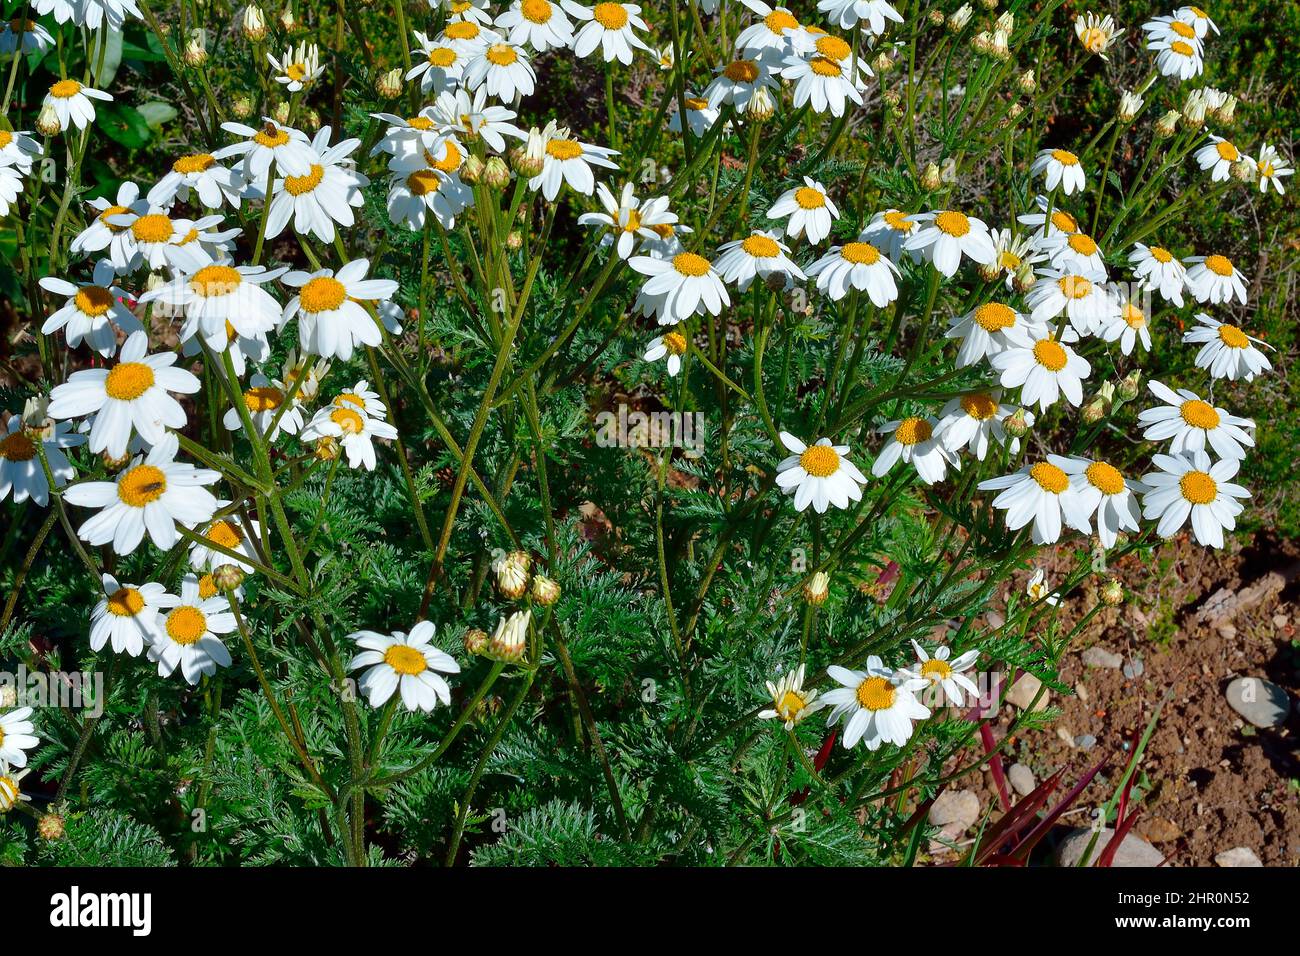 Corymbflower Tansy (Chrysanthemumum corymbosum) in bloom, Habitat: Edges and clearings of deciduous forests, Pyrenees-Atlantiques, France Stock Photo